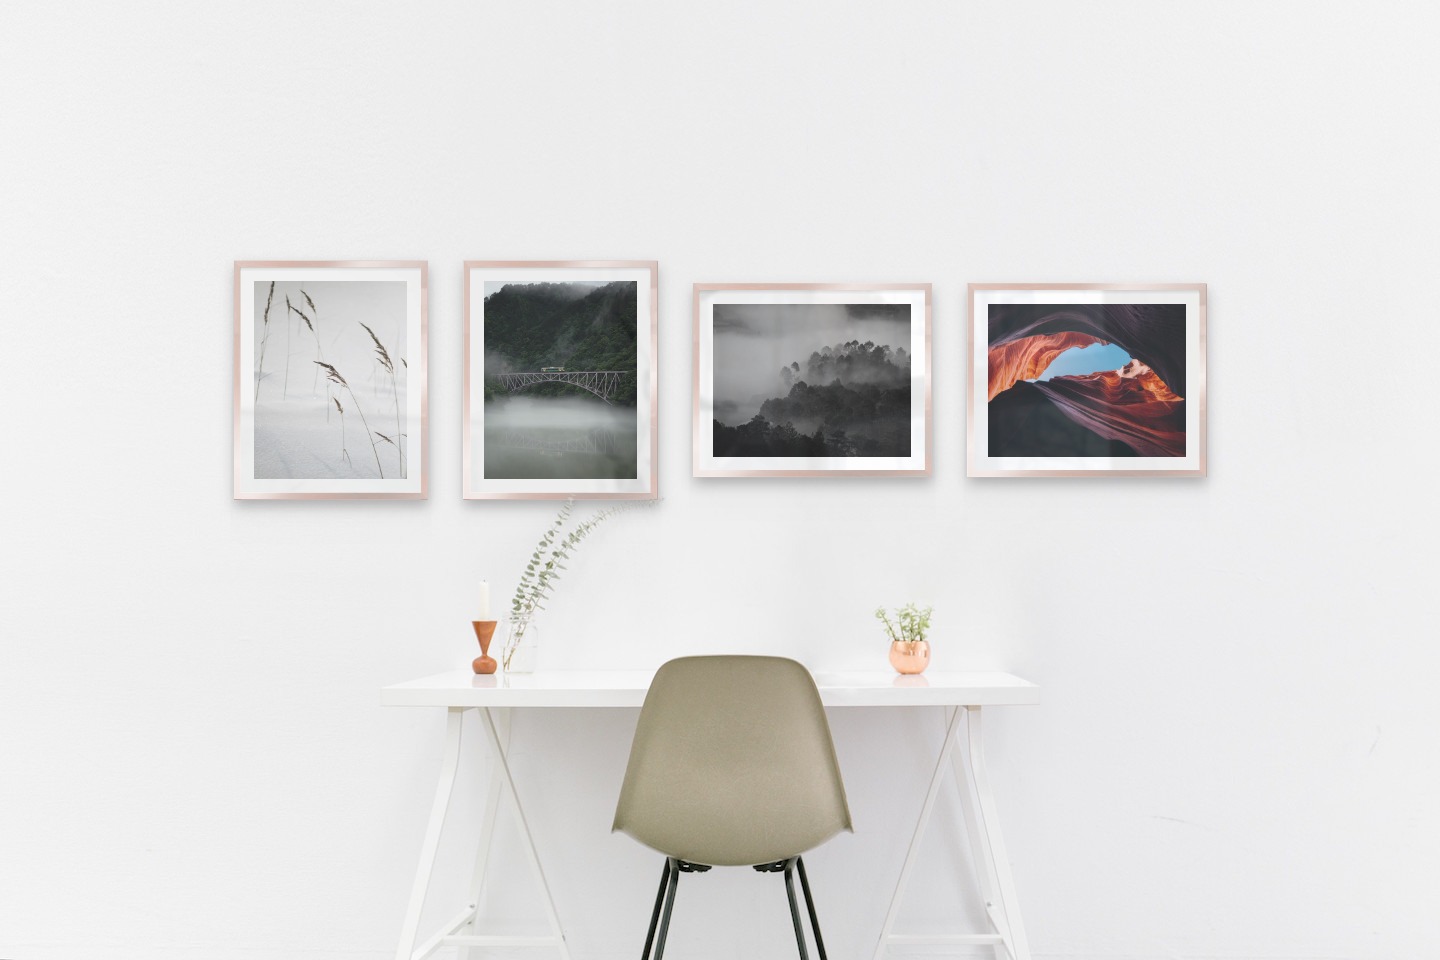 Gallery wall with picture frames in copper in sizes 40x50 with prints "Sharp in the snow", "Train over bridge", "Foggy wooden tops" and "Red rock formations"